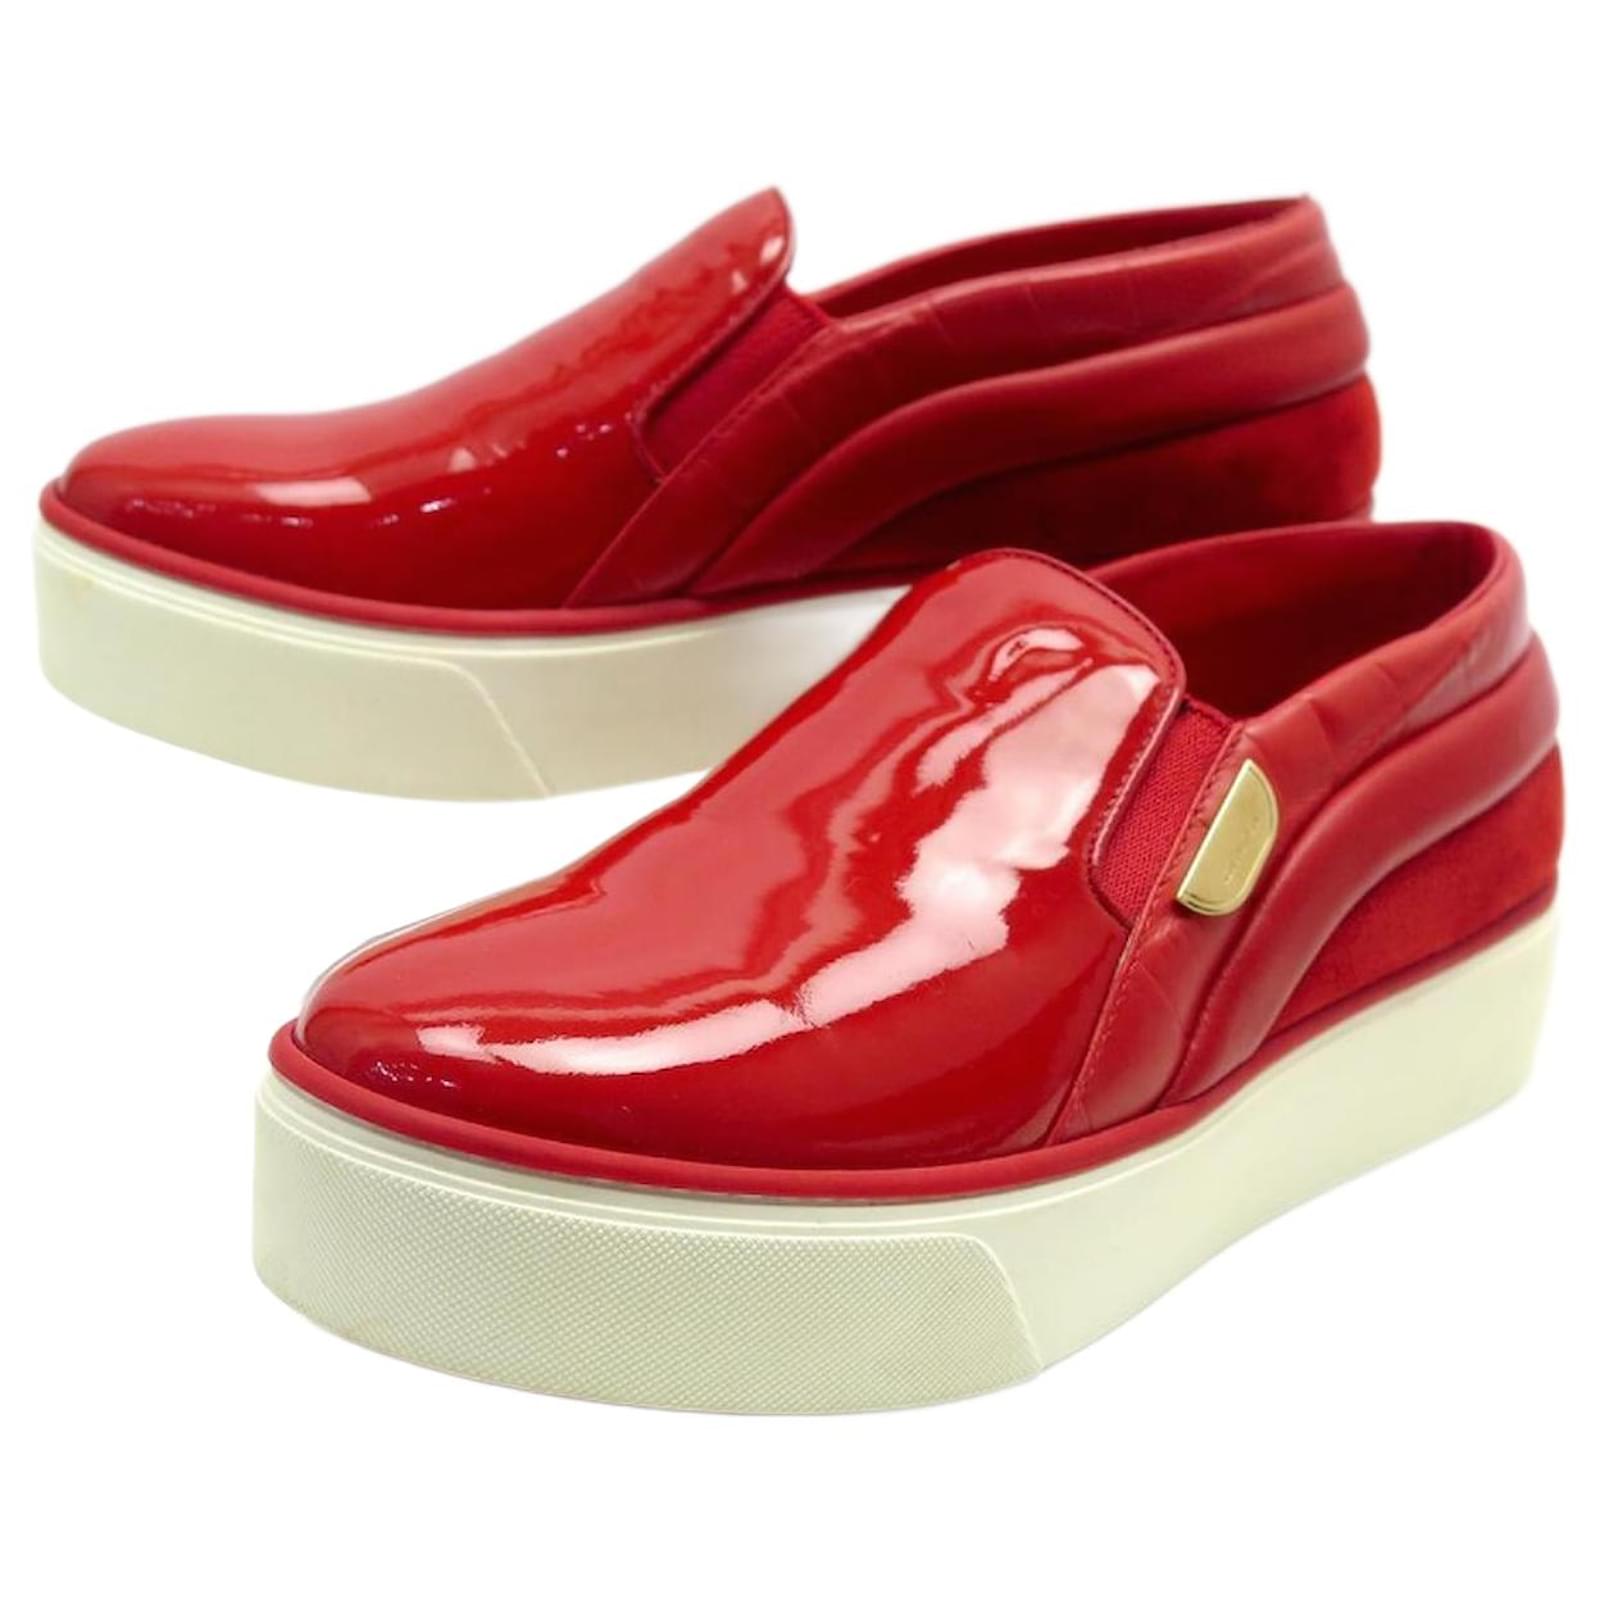 louis vuitton red bottom shoes collection!